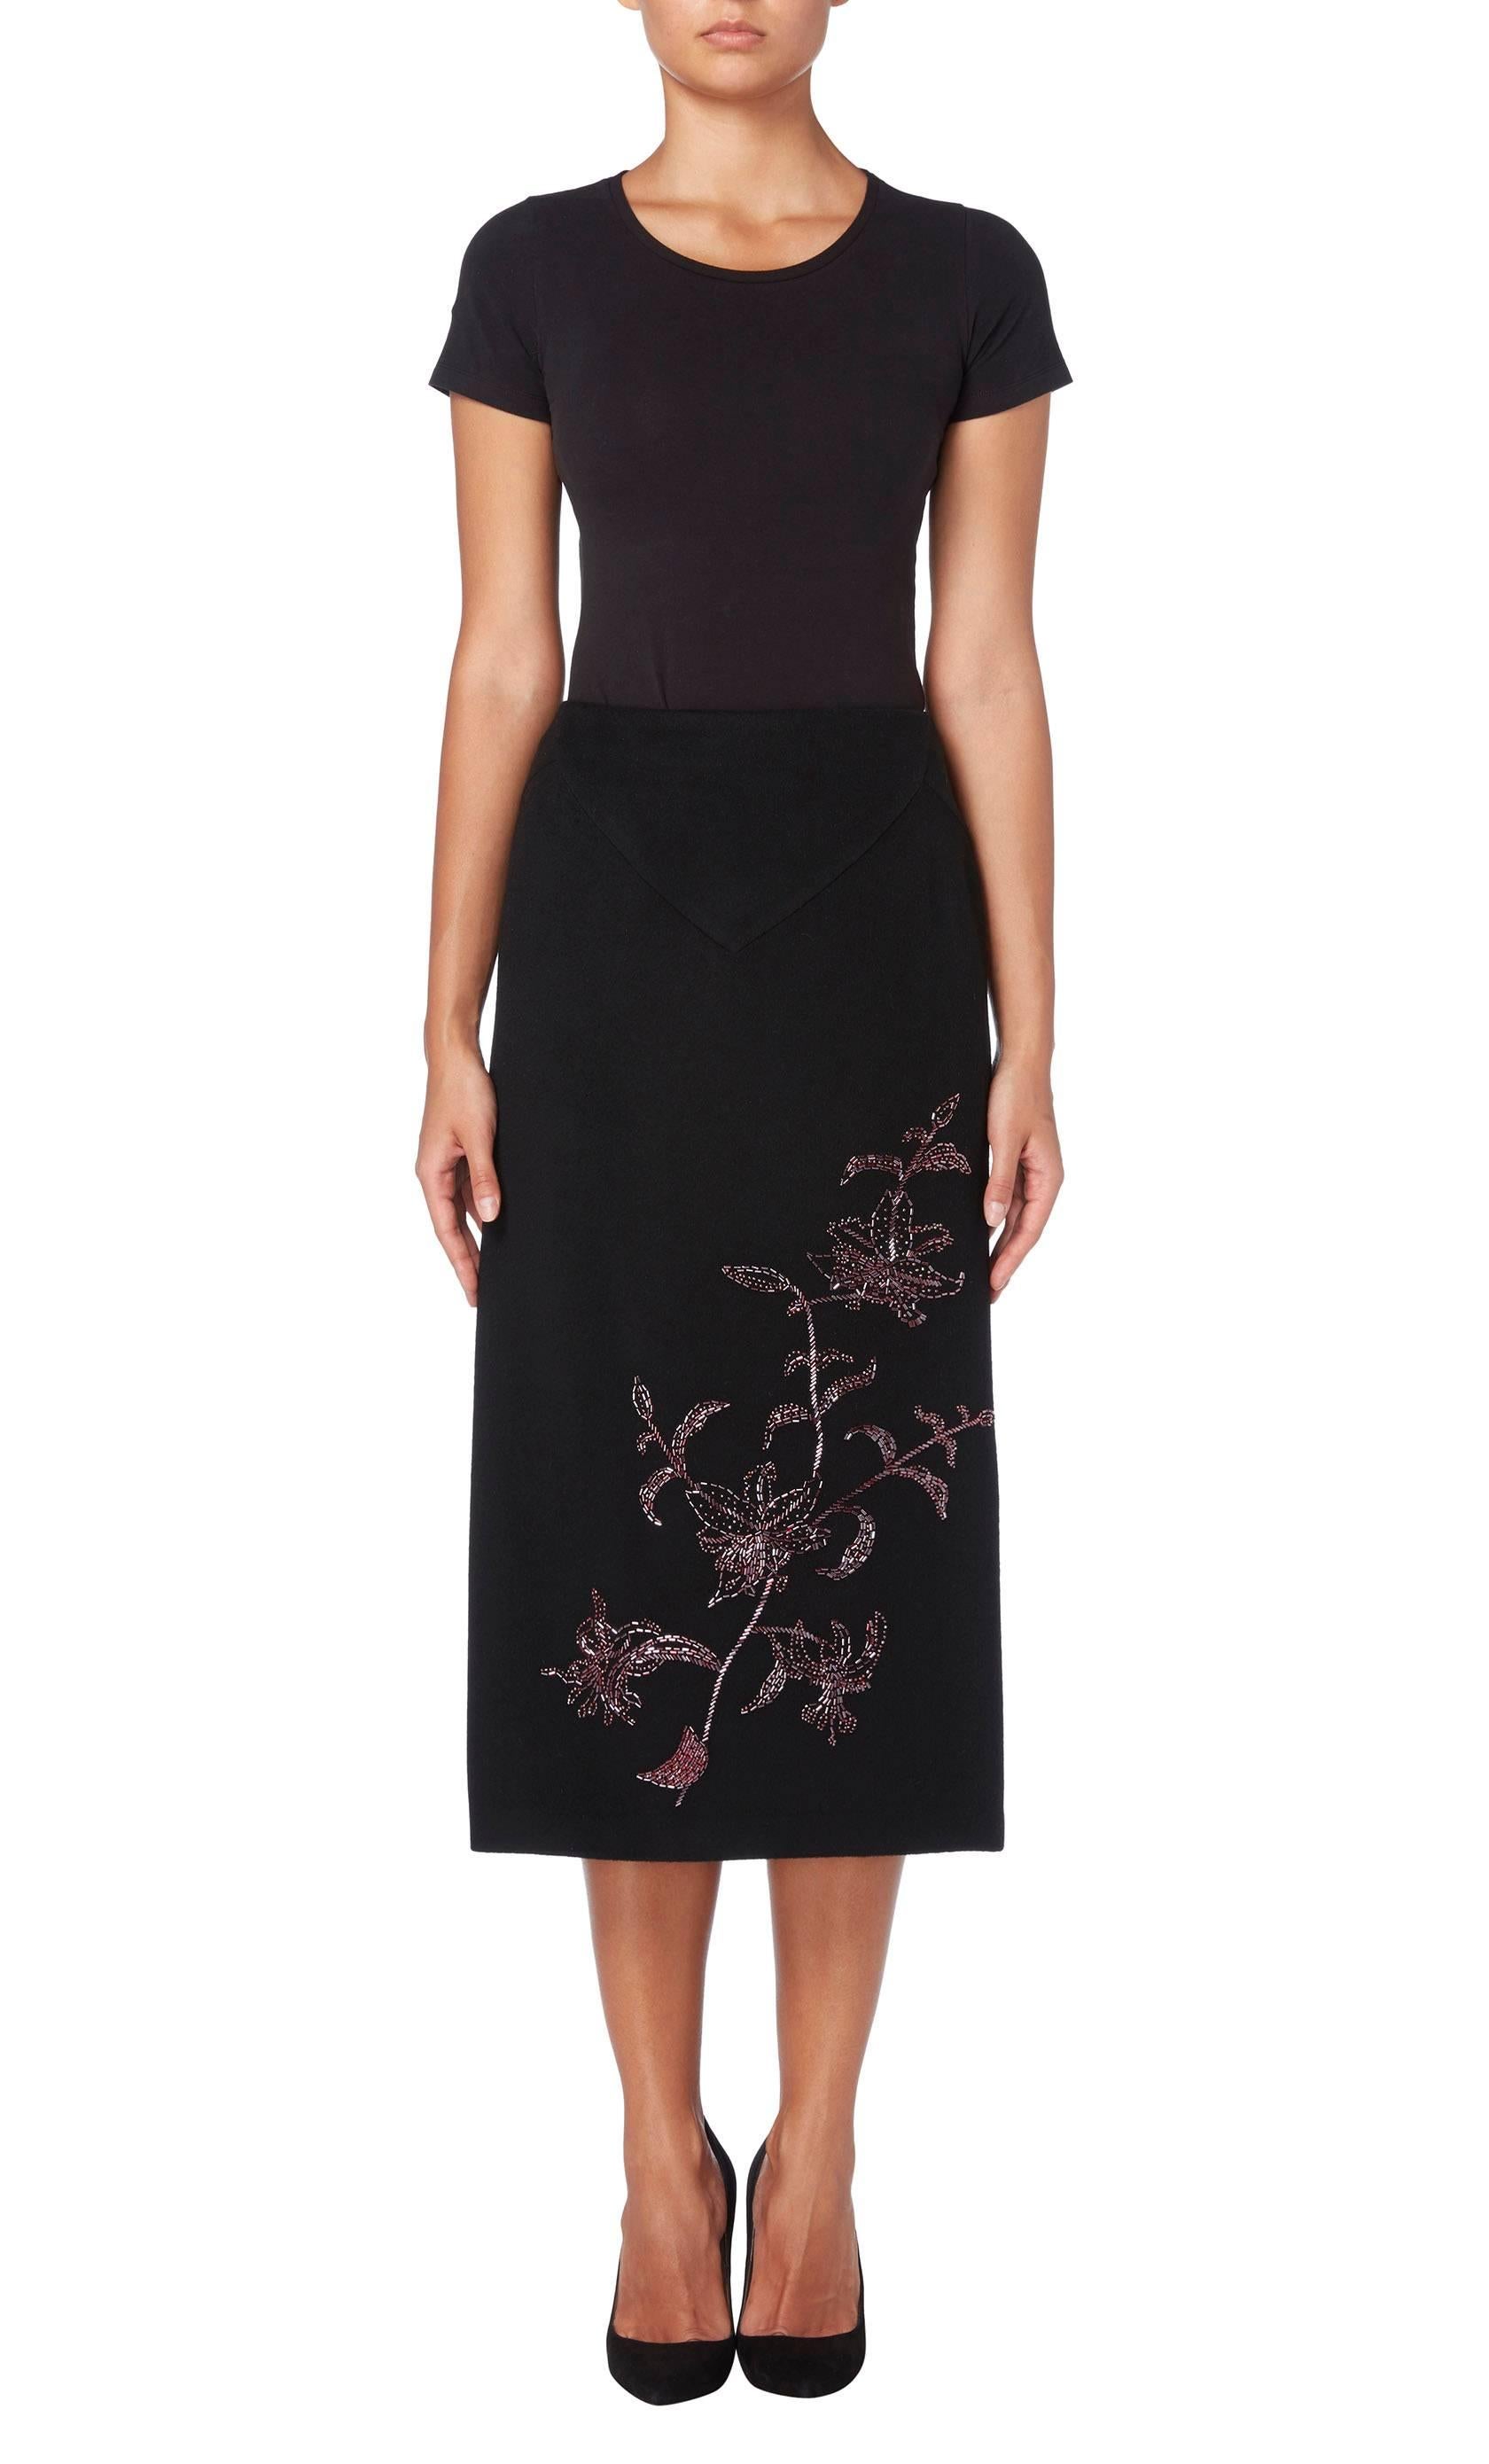 From Alexander McQueenAutumn/Winter 1988 collection, this pencil skirt is a versatile piece for work or everyday. Constructed in a black cashmere wool, the skirt has a luxurious feel and features a floral motif in purple bugle beads to the front and